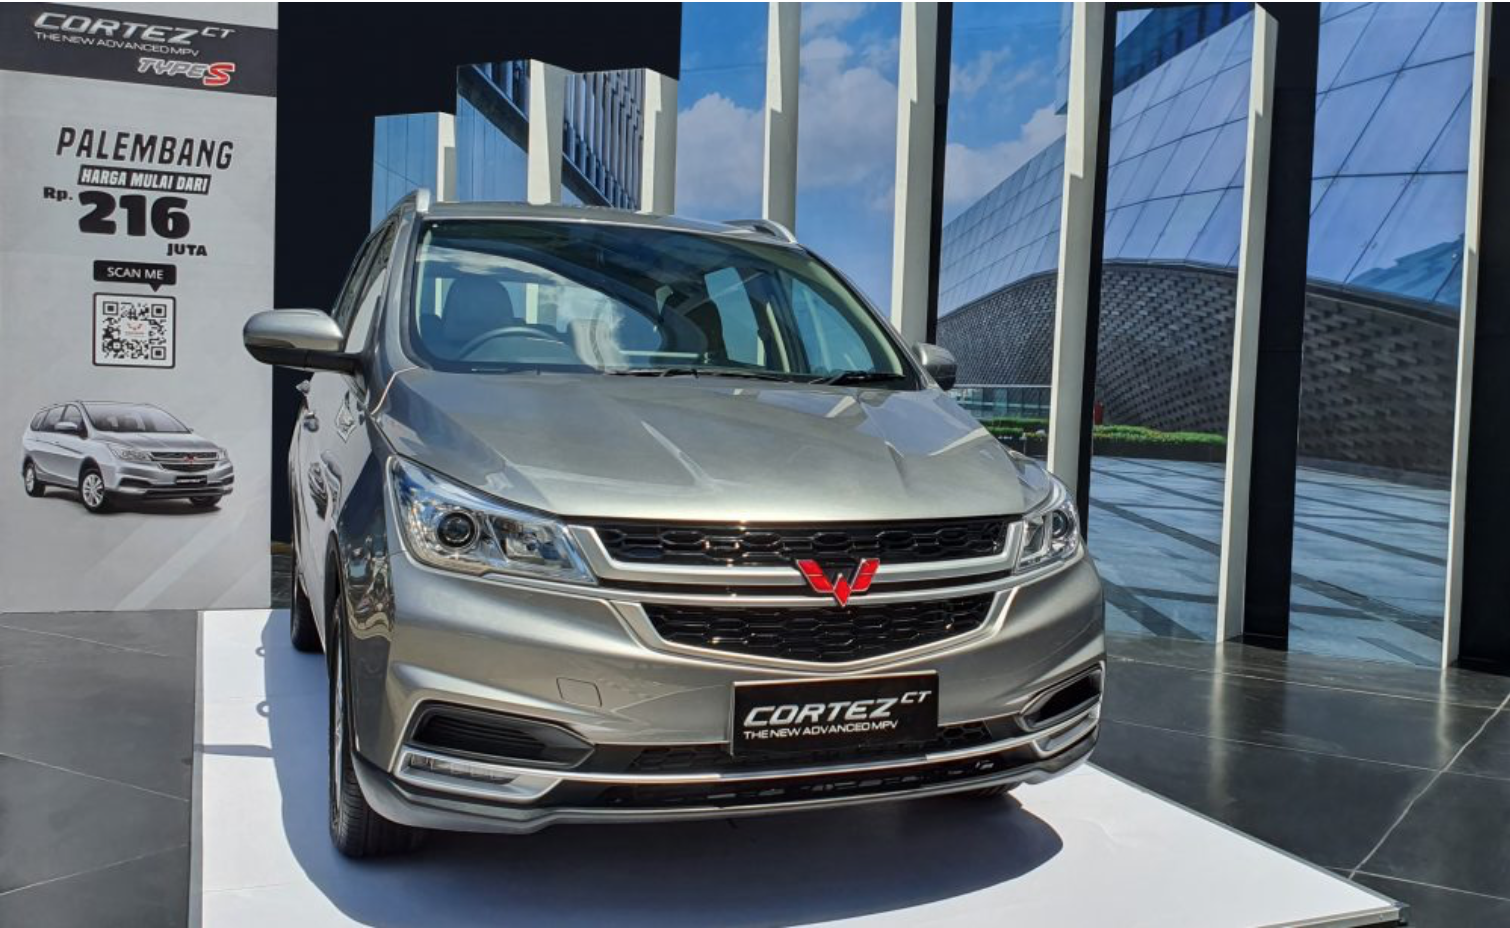 Image Wuling Cortez CT Type S Starts to Be Marketed in Palembang